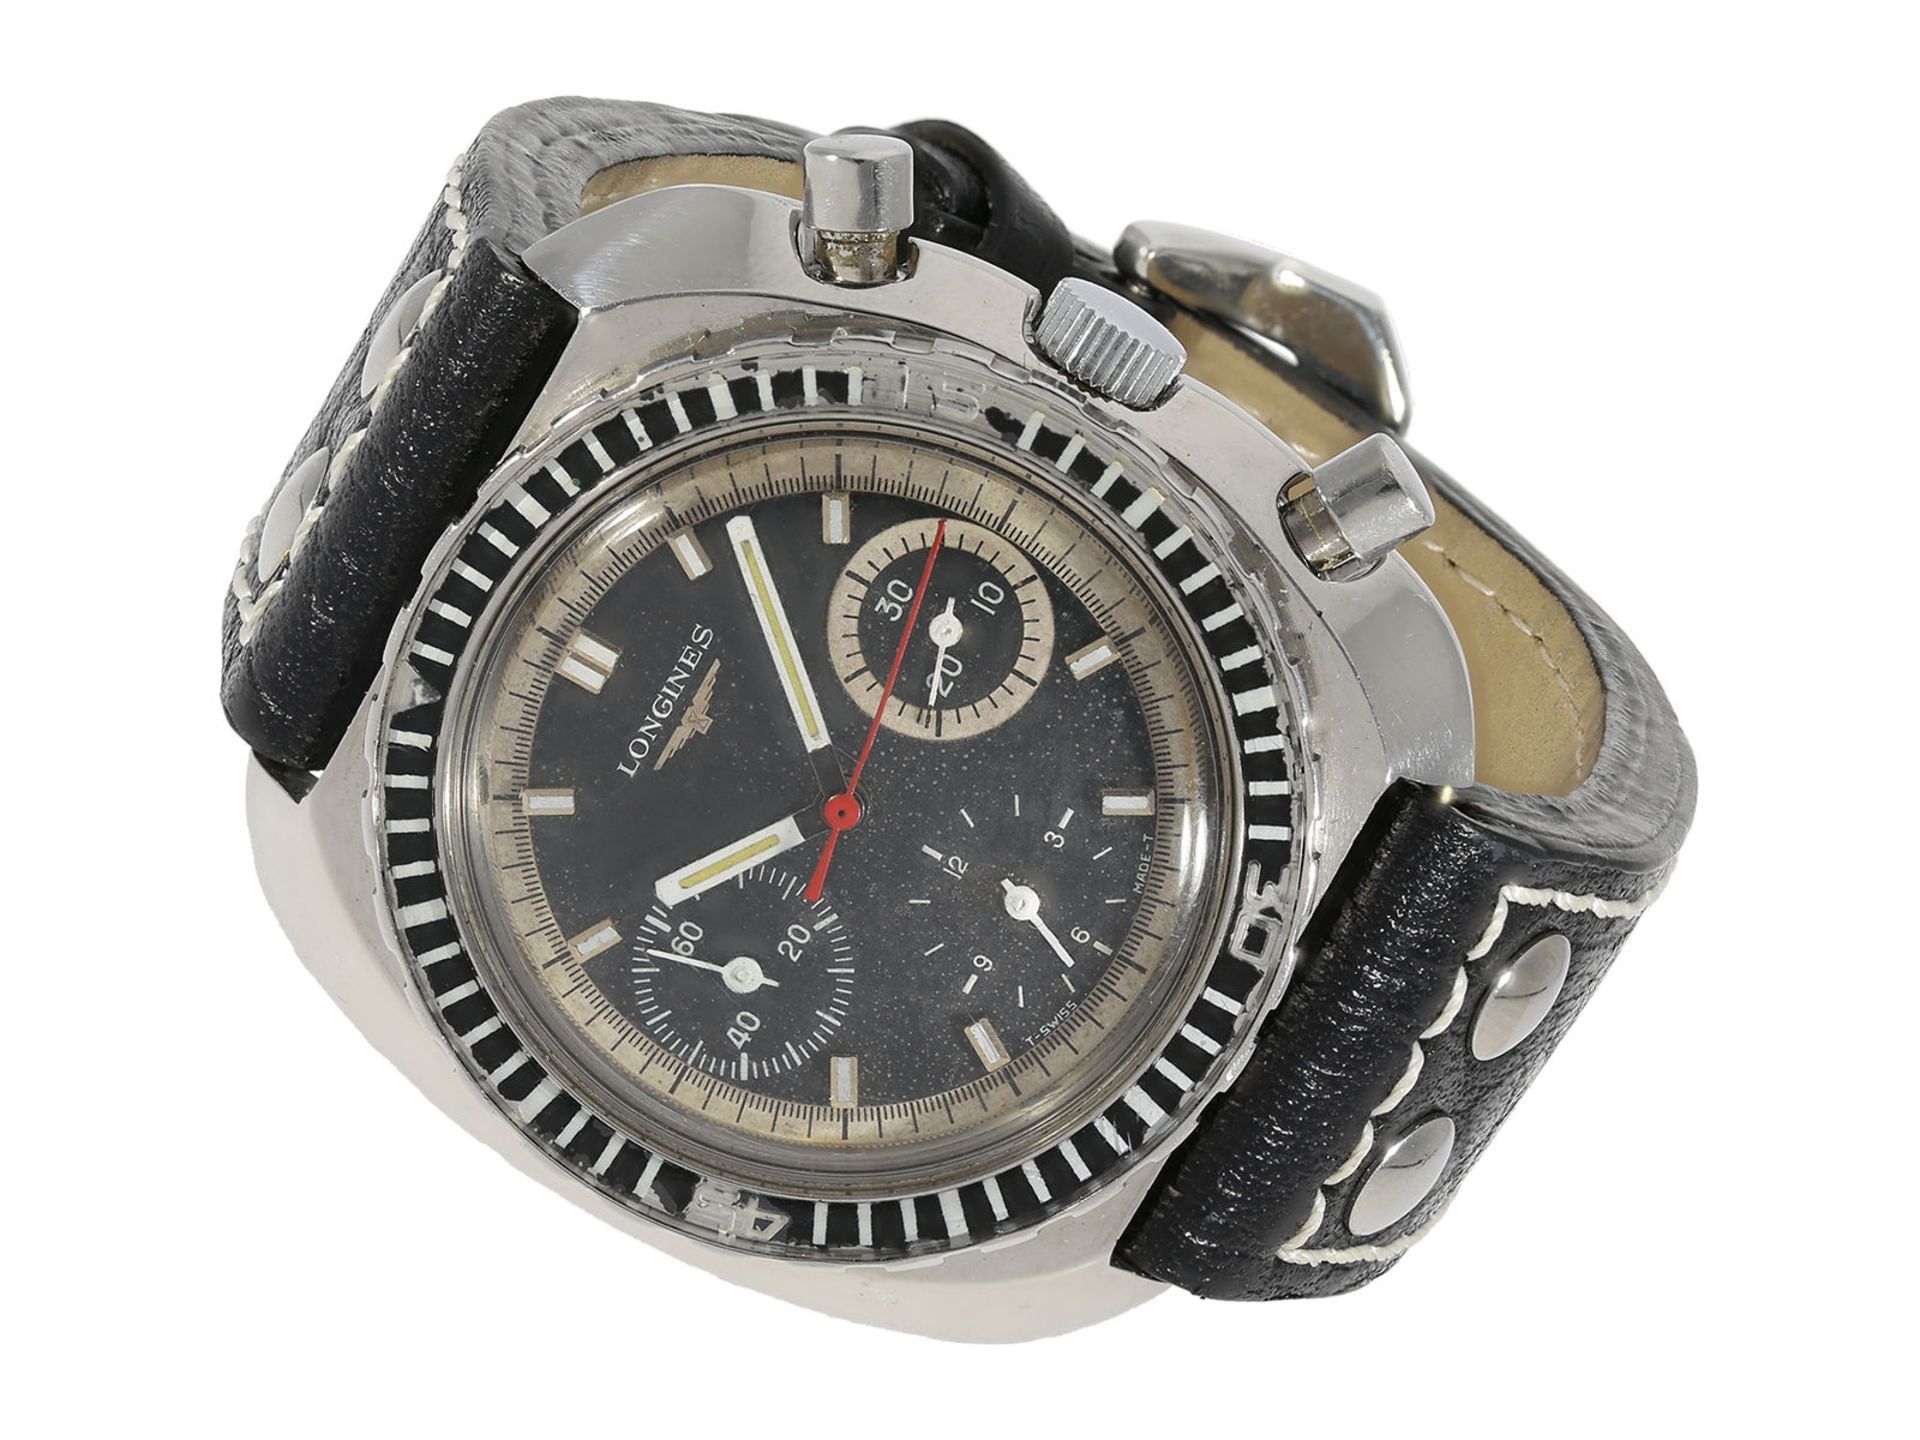 Wristwatch: wanted early Longines diver's chronograph Ref. 8229-2, ca. 1970